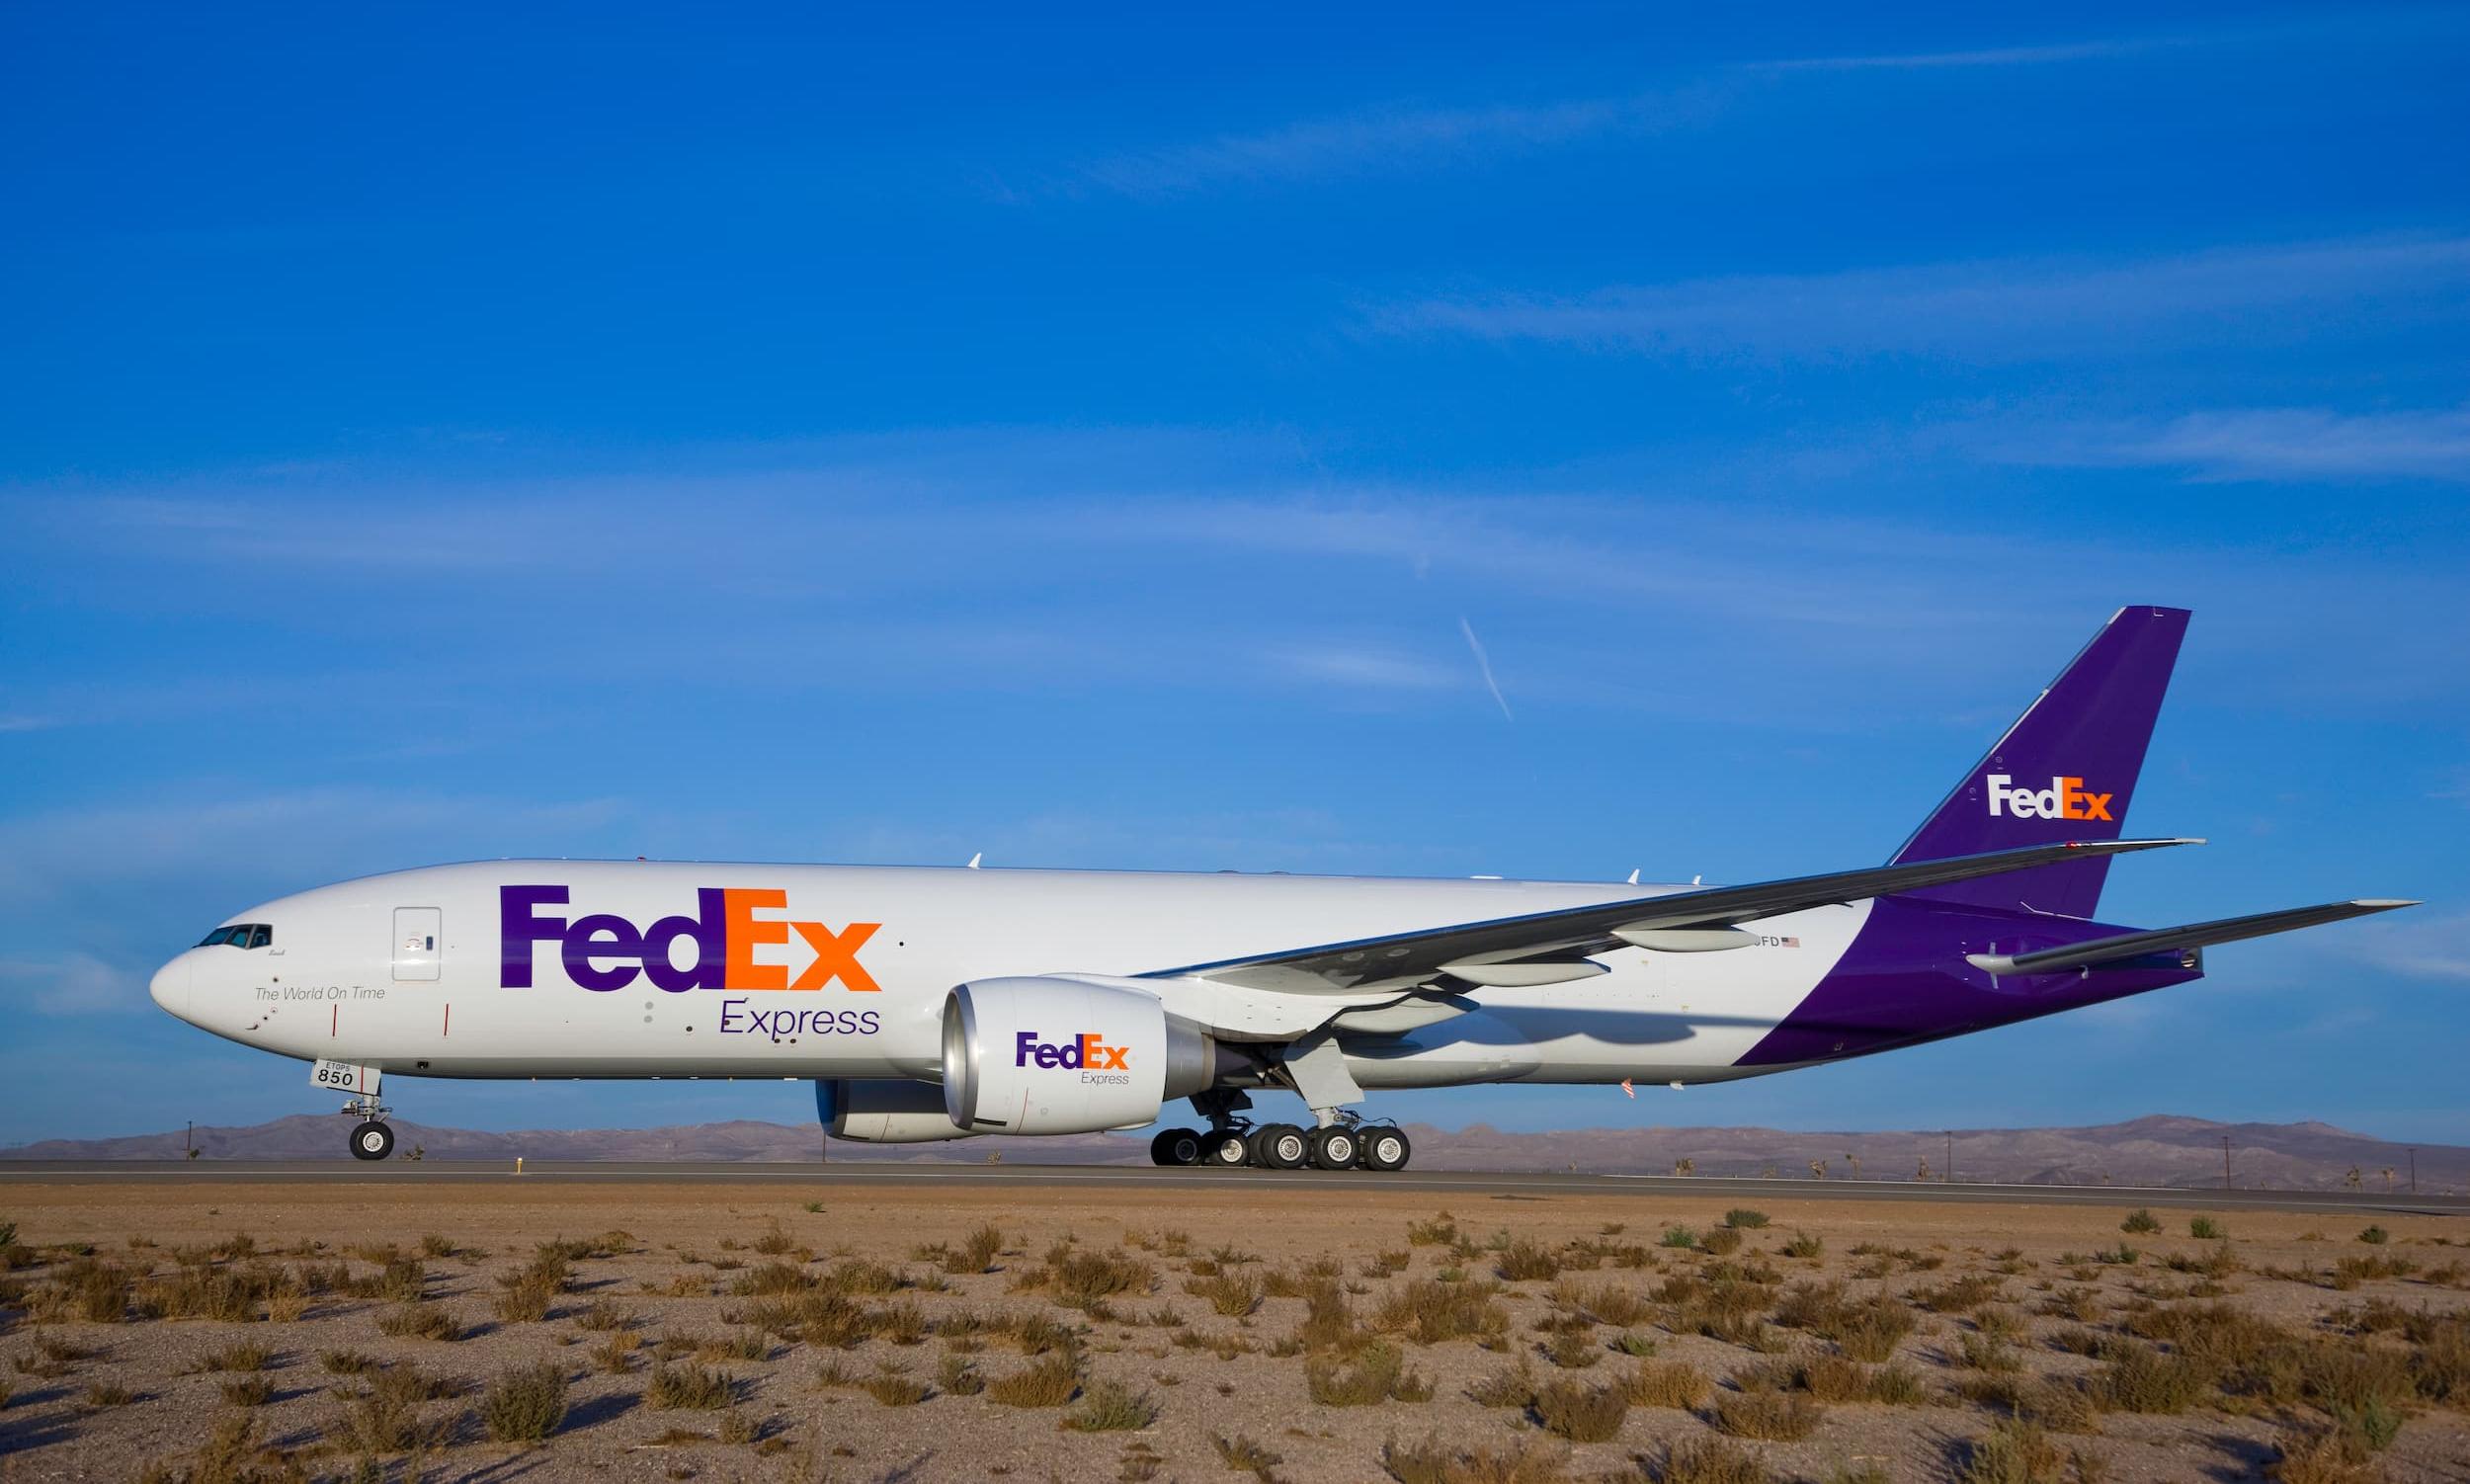 FedEx Q4 revenue at 21.9bn, ends fiscal 2023 with 90.2bn revenue